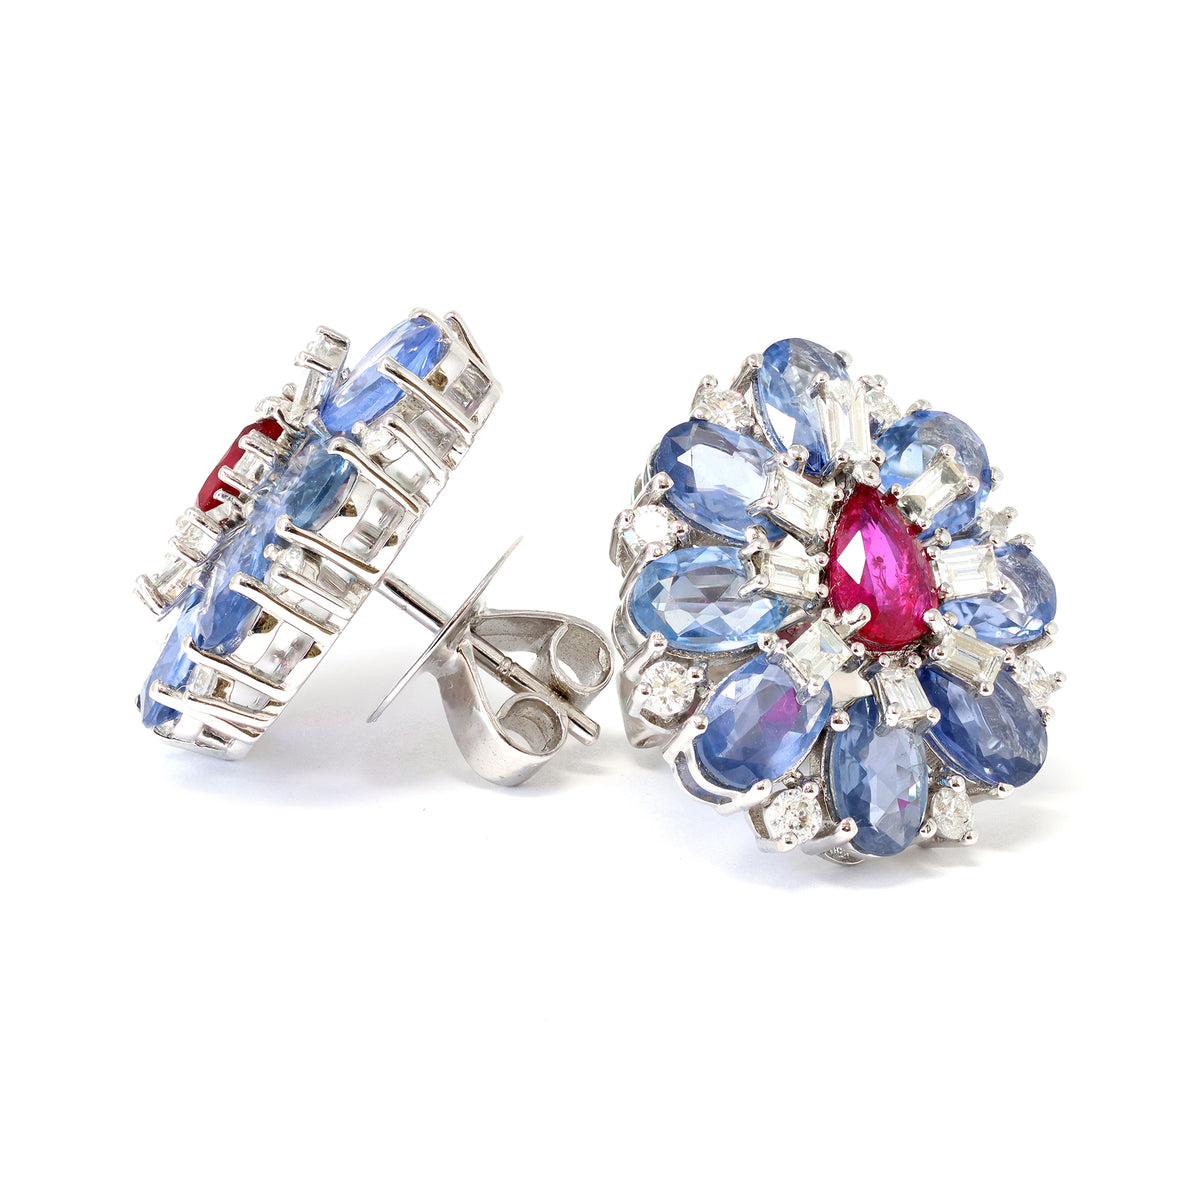 sapphire-diamond-and-ruby-earrings-set-in-18-karat-white-gold-front-and-side-view-2000x2000.jpg